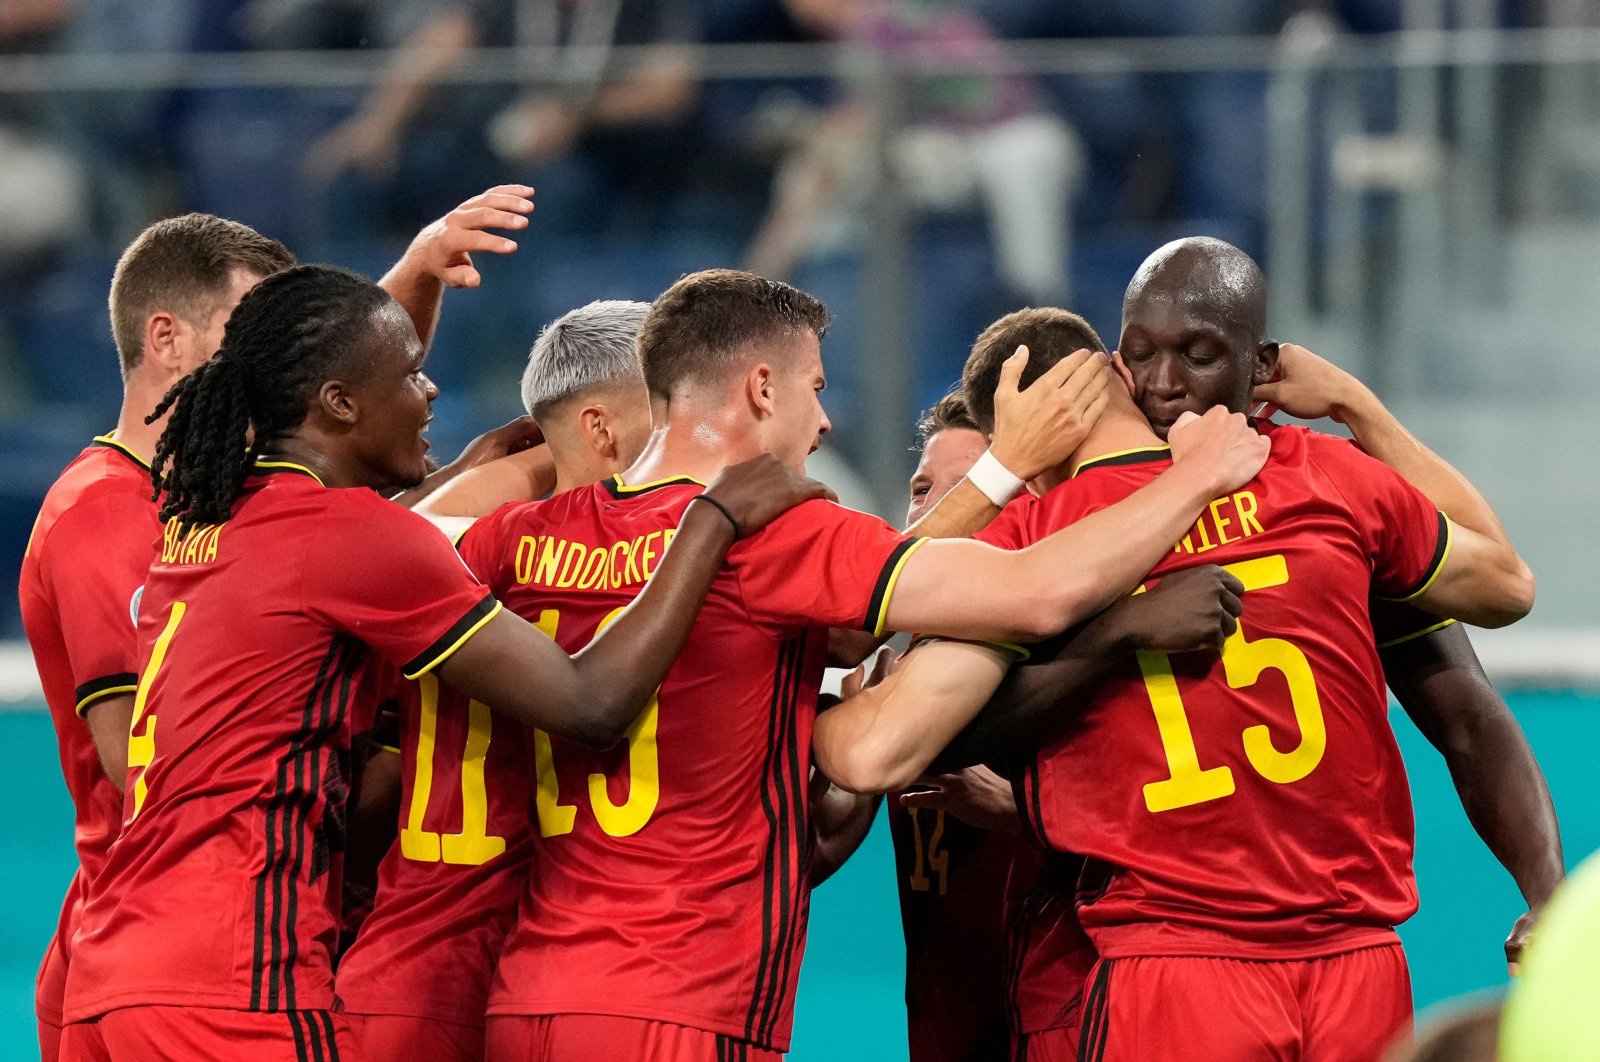 Belgium players celebrate a goal during a Euro 2020 match against Russia at the Saint Petersburg Stadium, in Saint Petersburg, Russia, June 12, 2021. (AFP Photo)